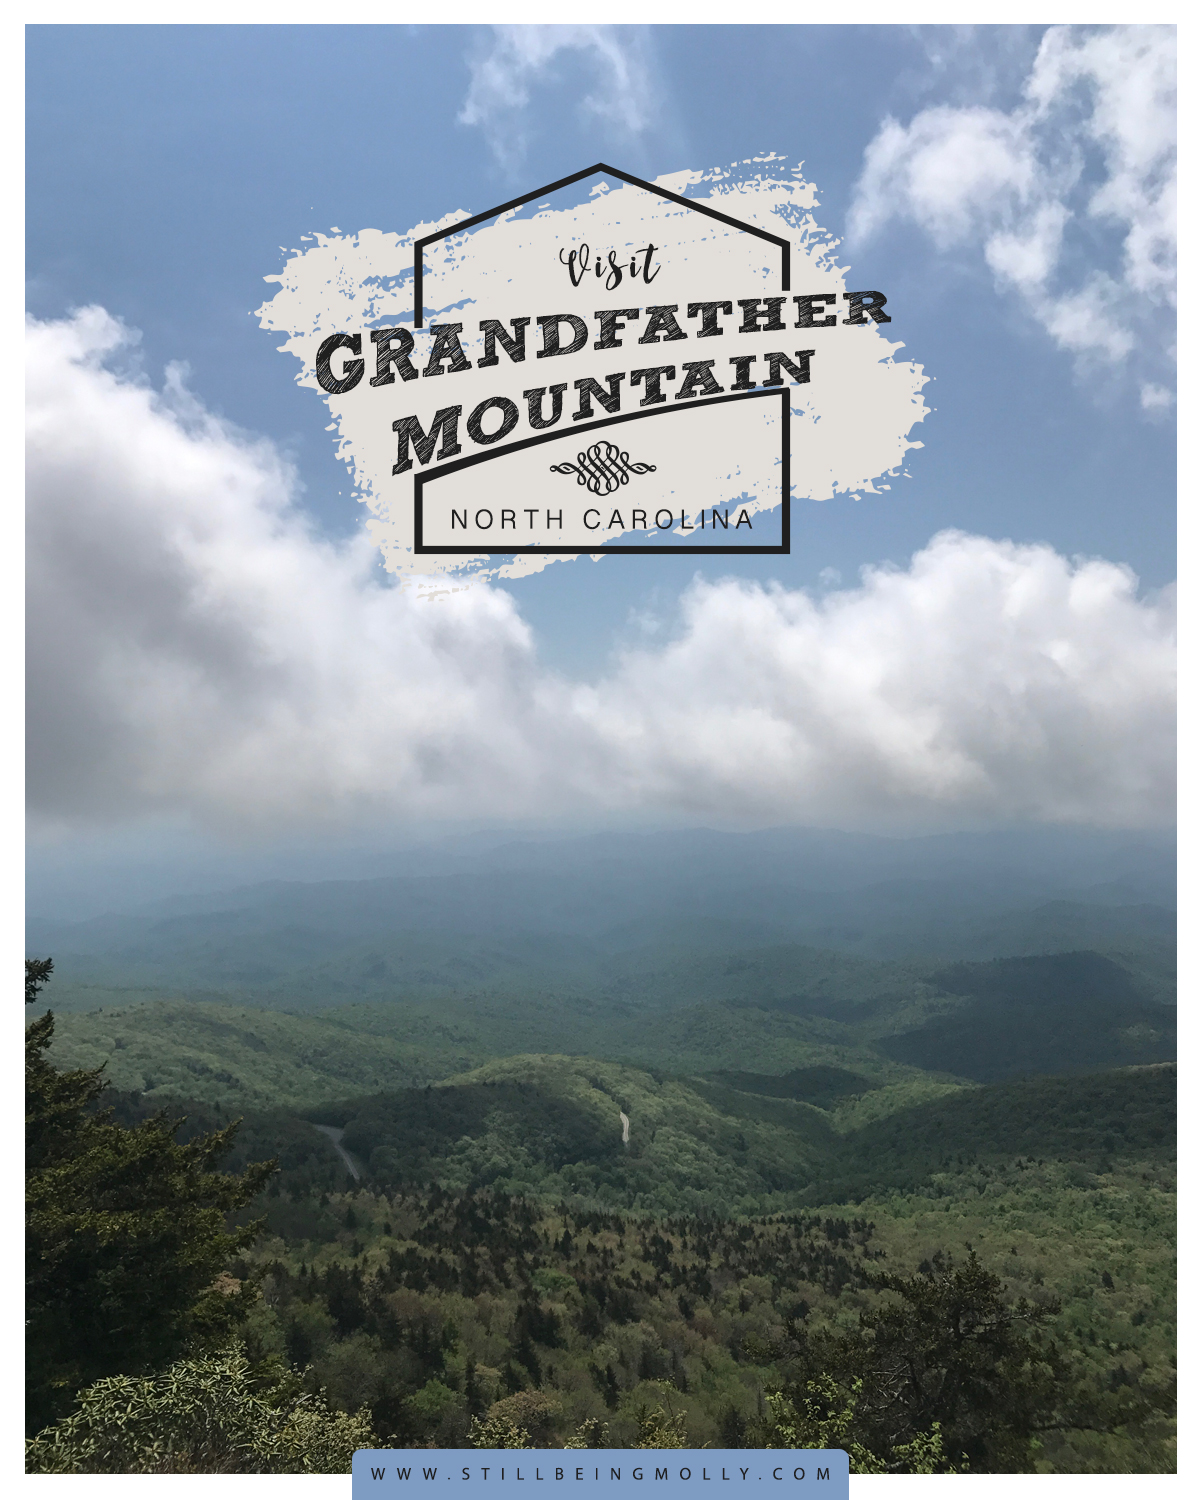 Visit North Carolina: Our Weekend Away in Grandfather Mountain NC by lifestyle blogger Still Being Molly